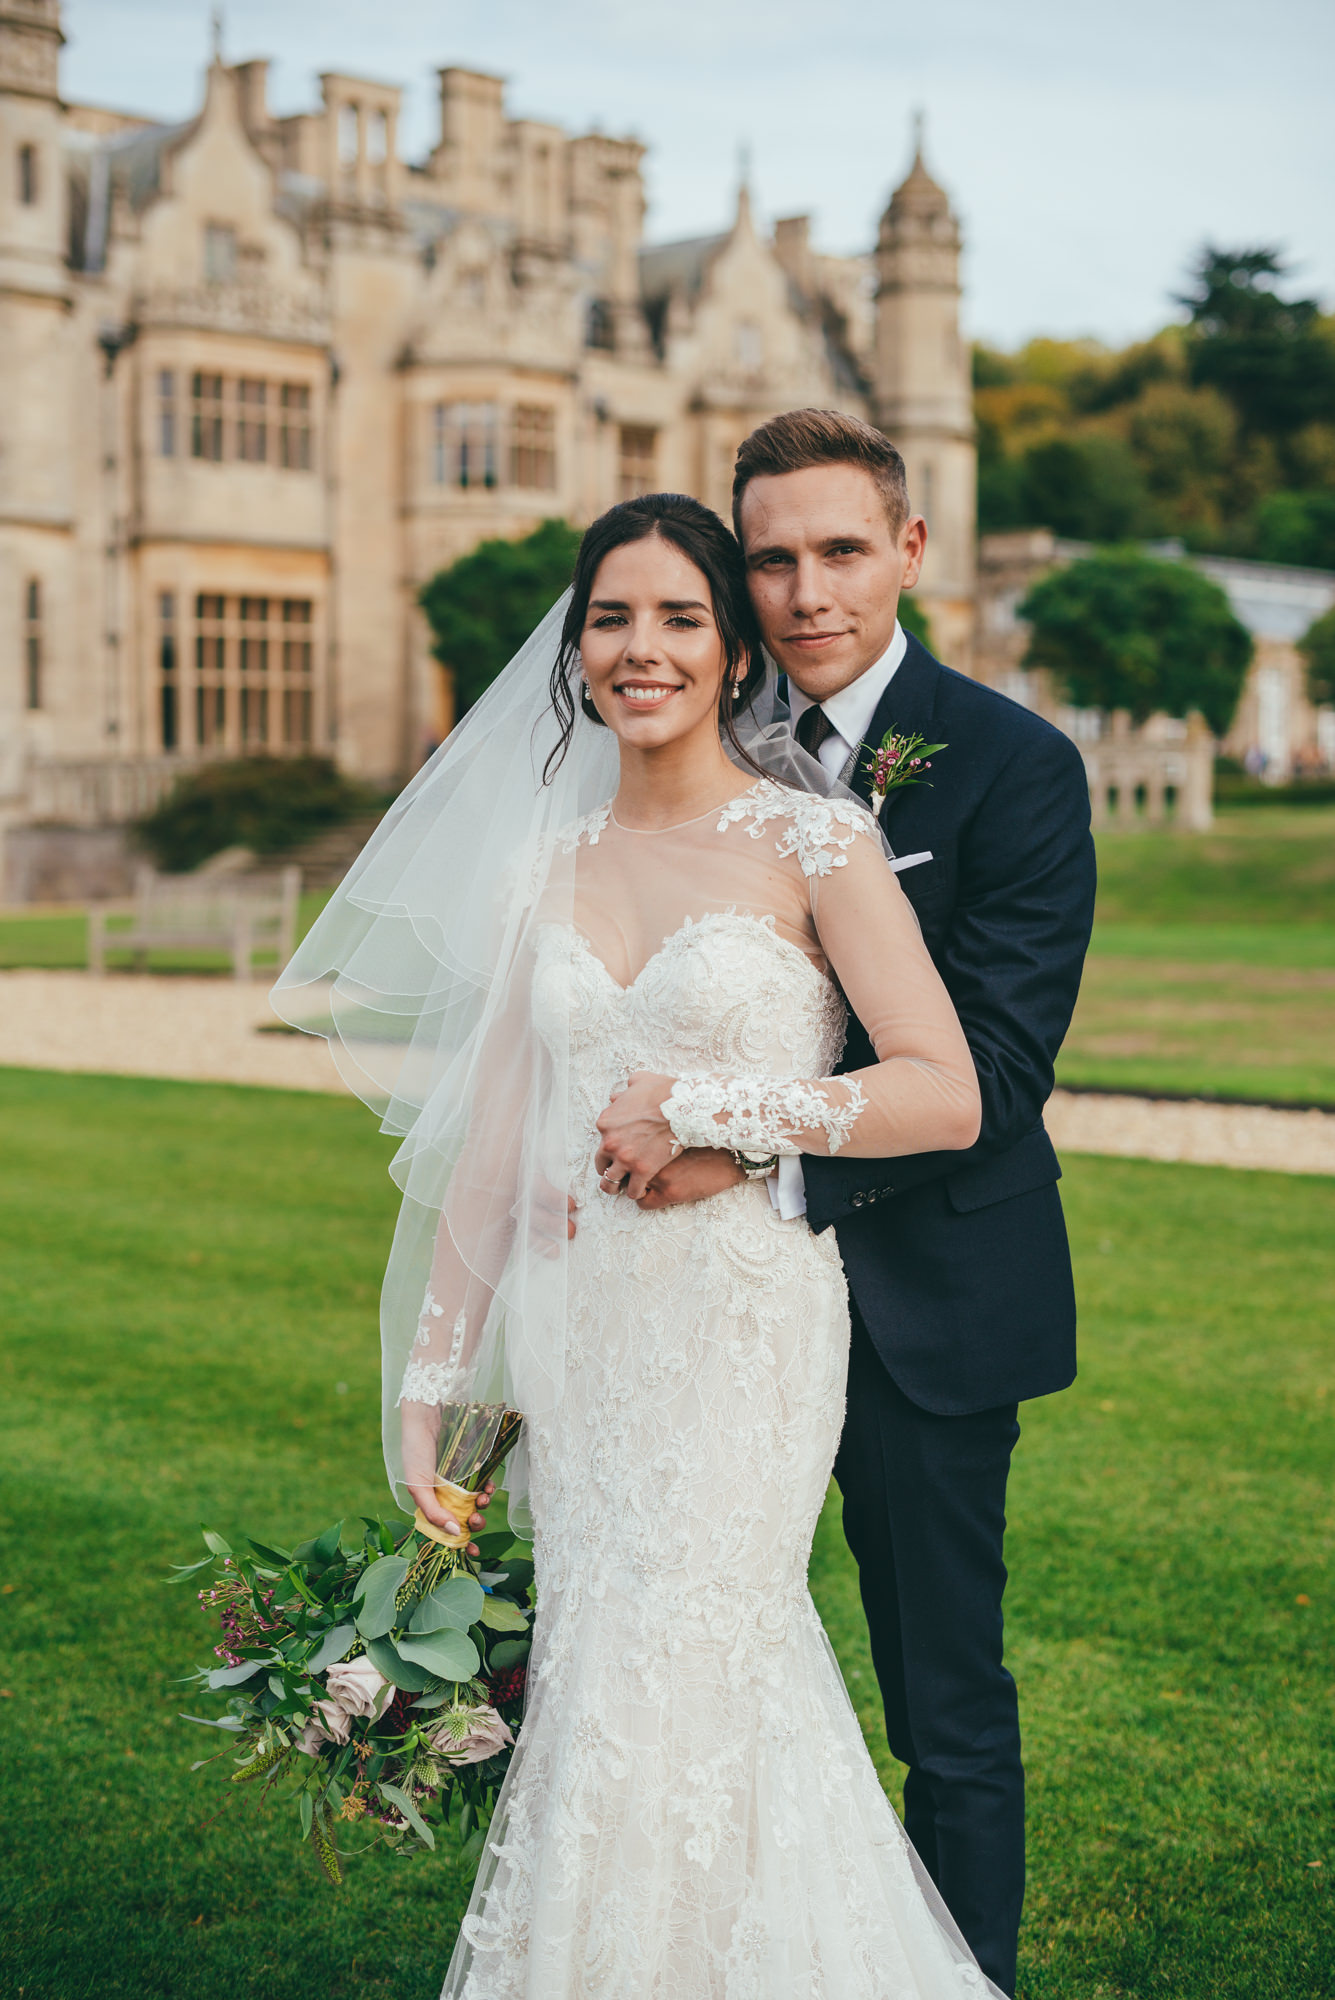 posed picture of the bride and groom at harlaxton manor